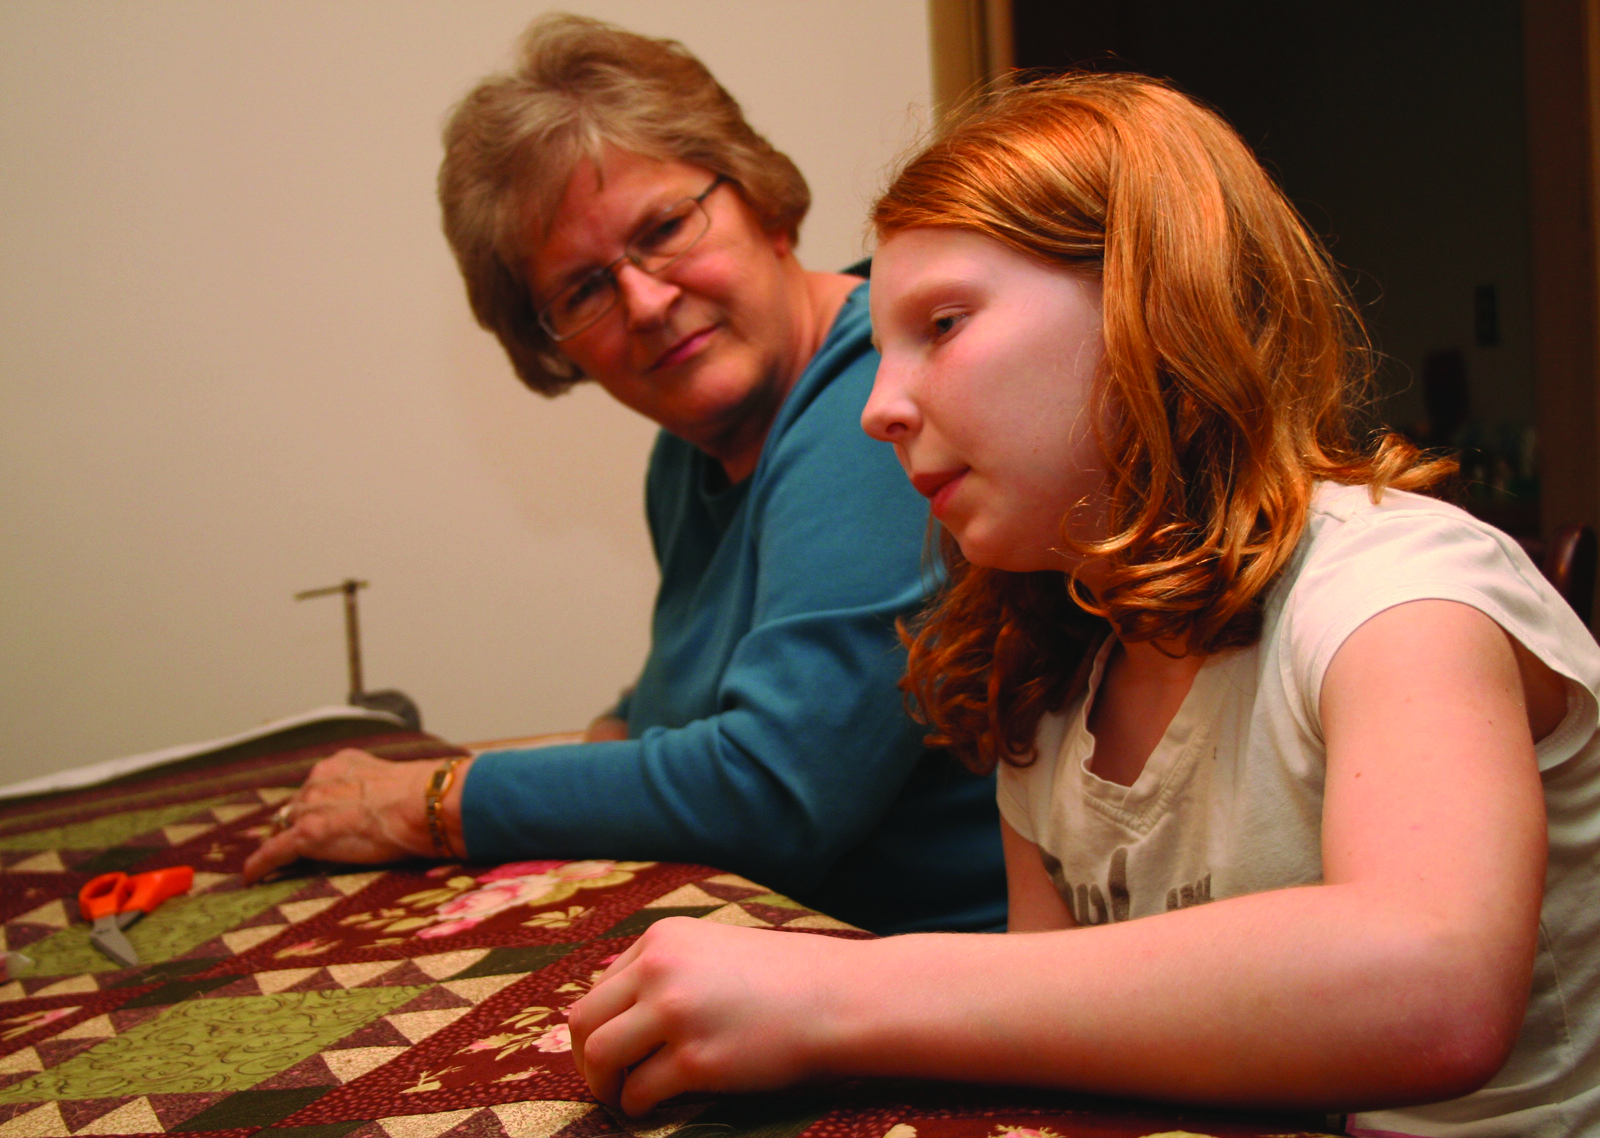 Penny Zweimiller, a member of St. Joseph Parish, Flush, teaches her 11-year-old granddaughter Jana Kellogg how to quilt. For nearly 100 years, quilters from St. Joseph have been building quilts to be raffled at the parish’s annual picnic.